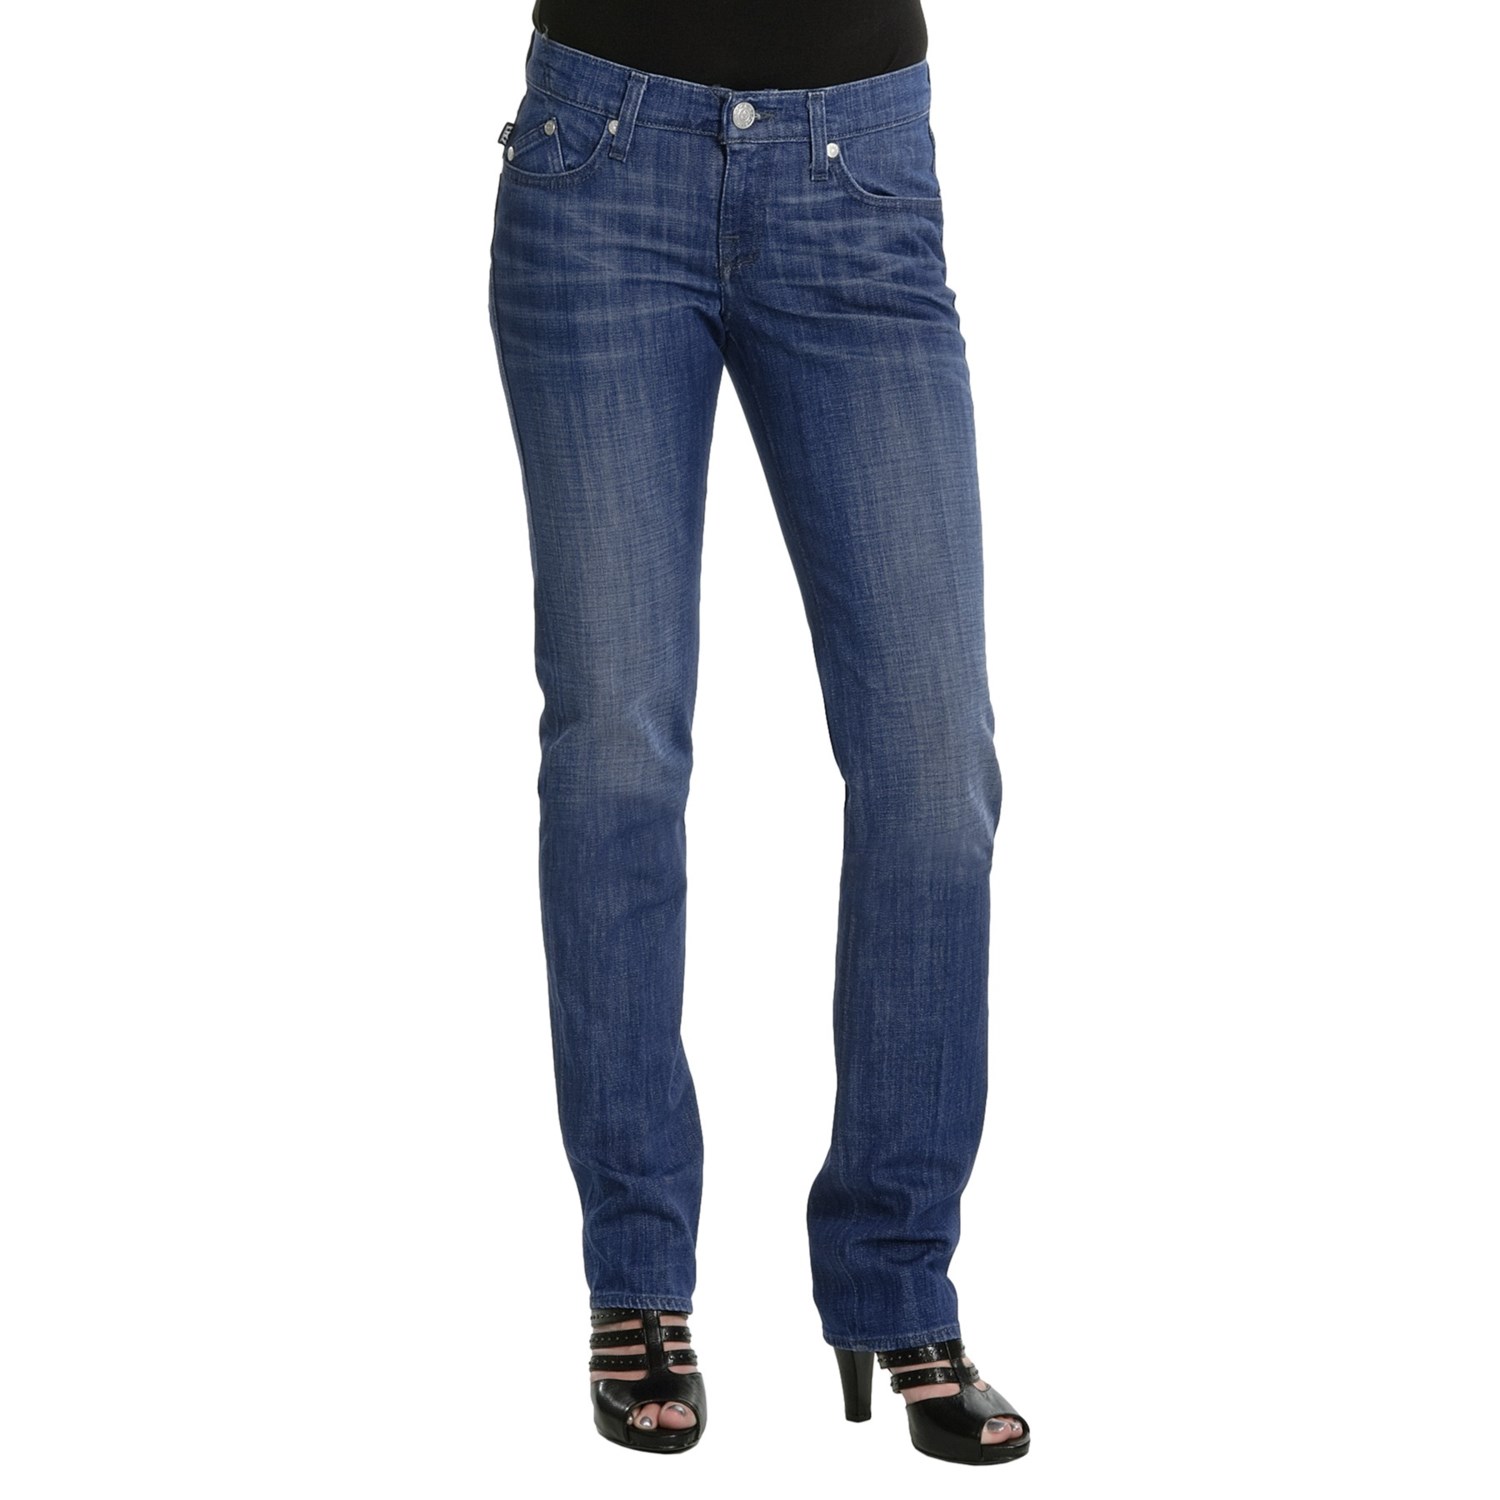 Rock and Republic Stella Jeans (For Women) 4020F - Save 51%